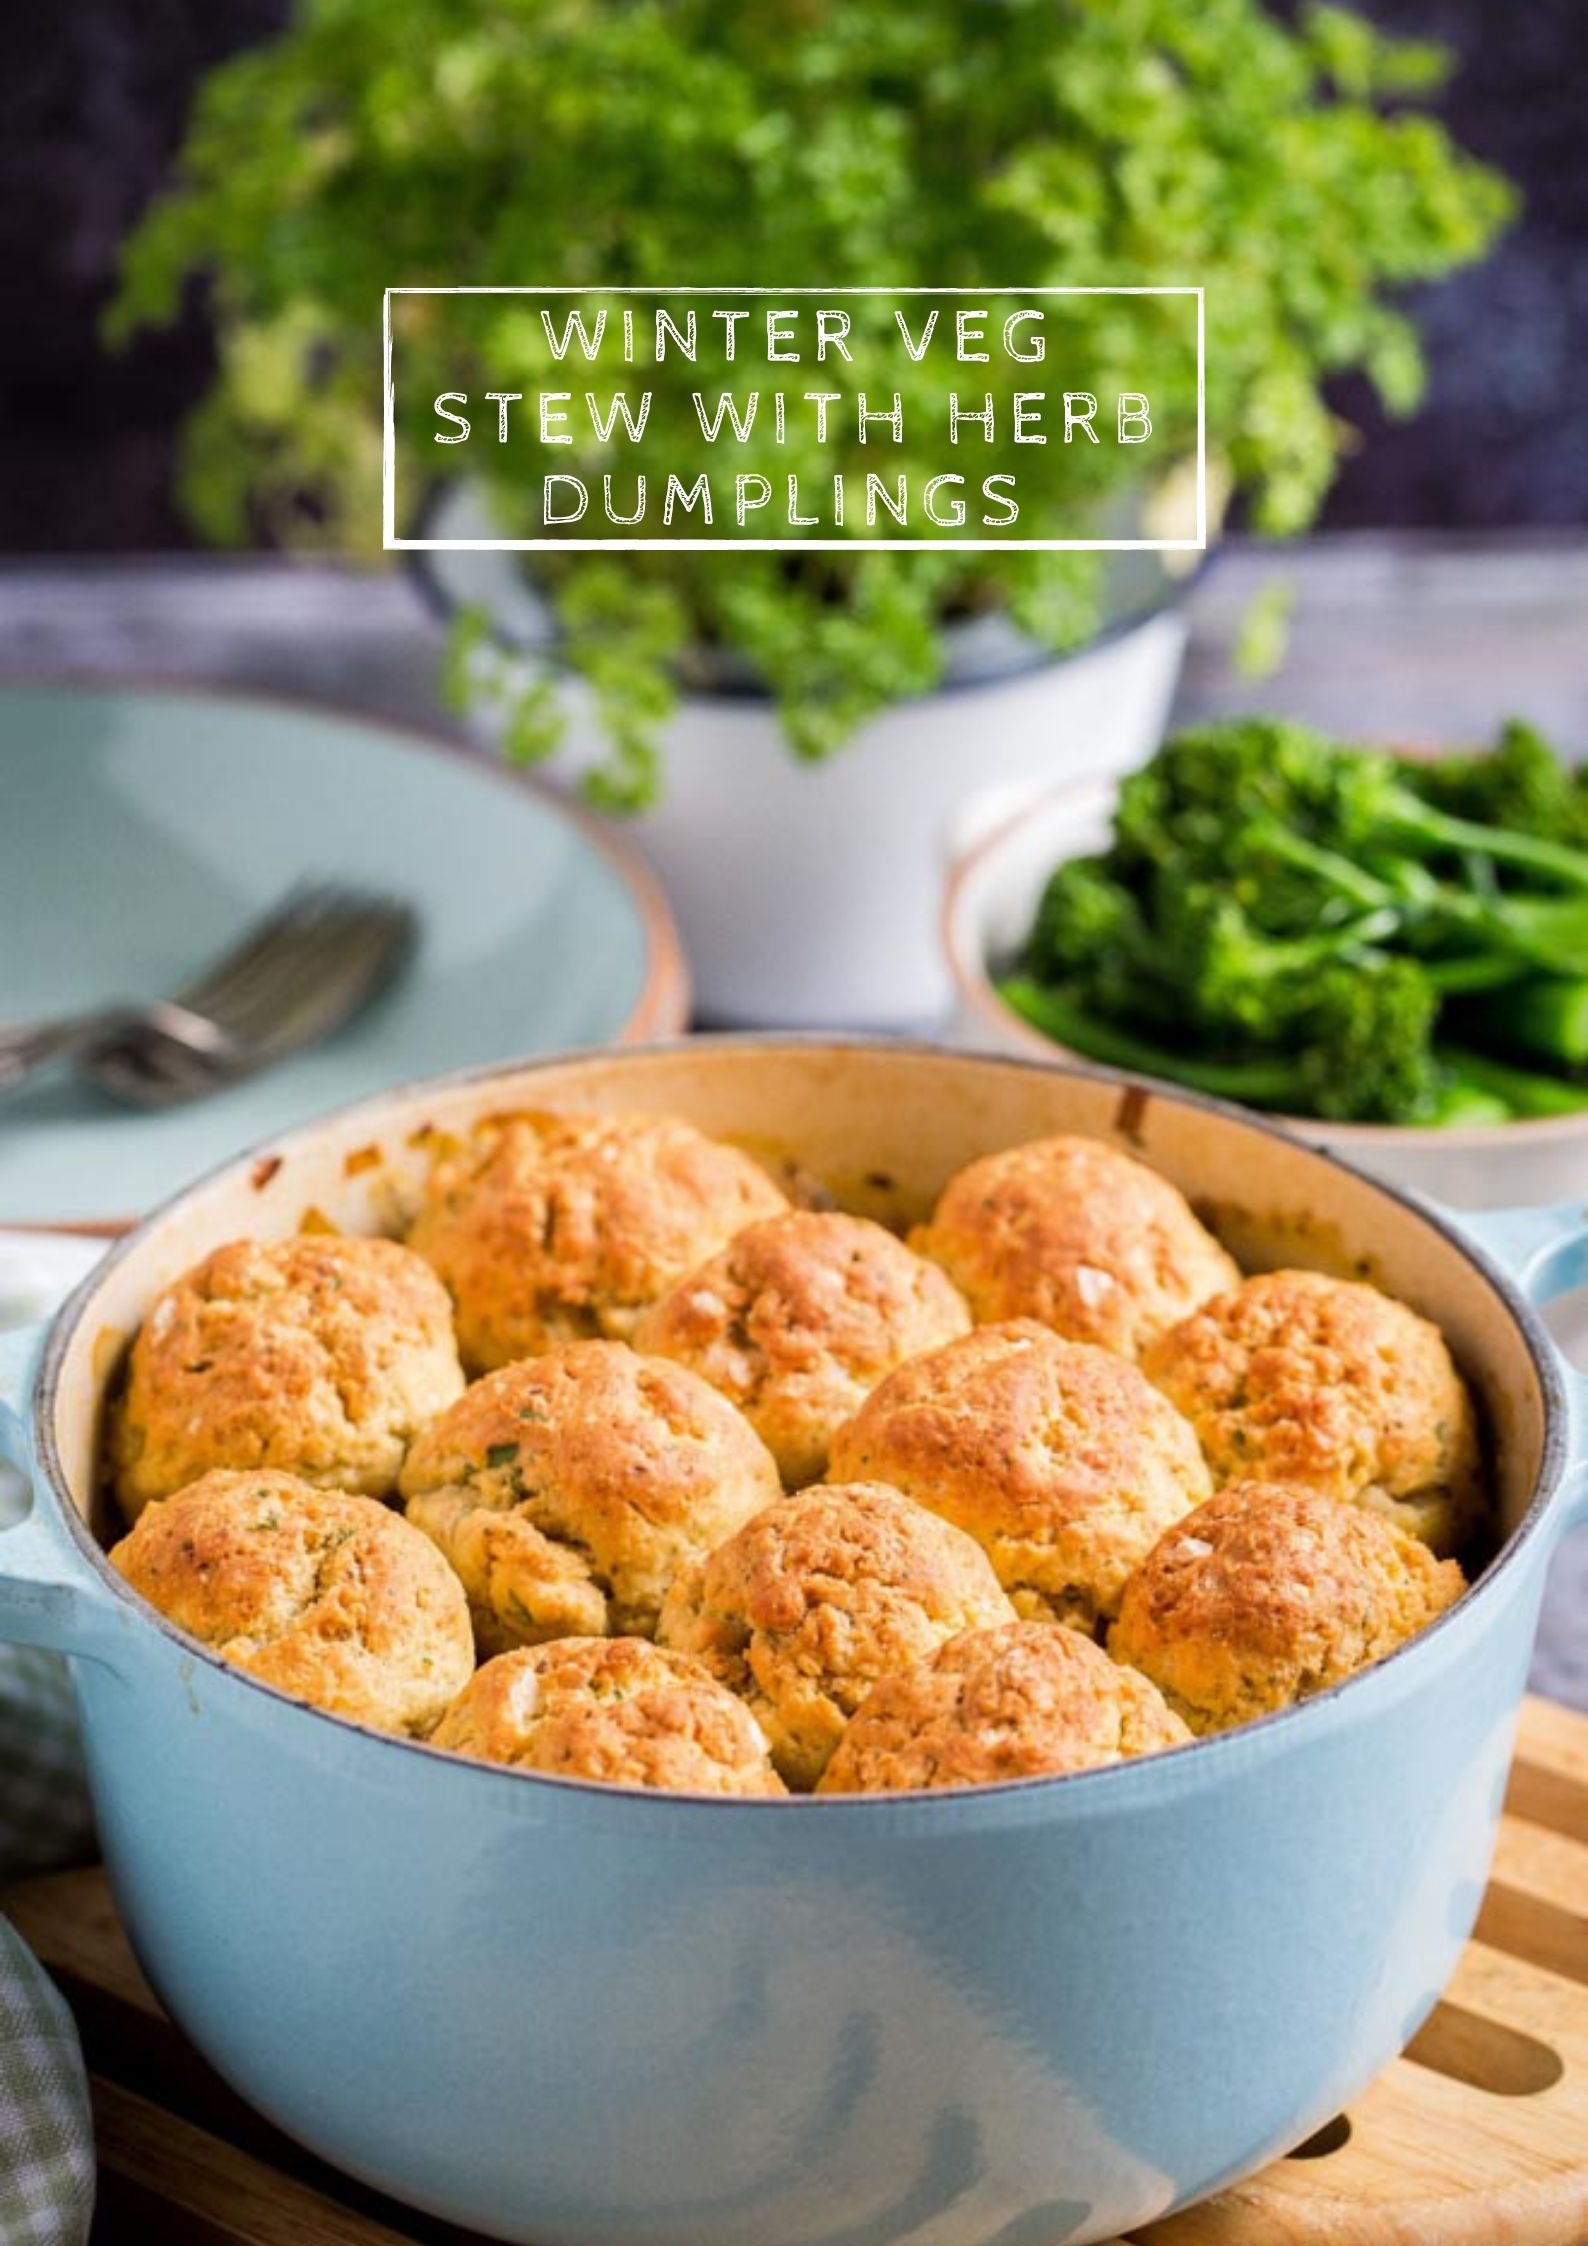 Hearty and delicious, this one pot vegetable stew topped with crisp, vegan and gluten free herb dumplings is the perfect winter comfort food! #vegetables #casserole #stew #veganrecipes #vegandumplings #dumplings | Recipe on thecookandhim.com